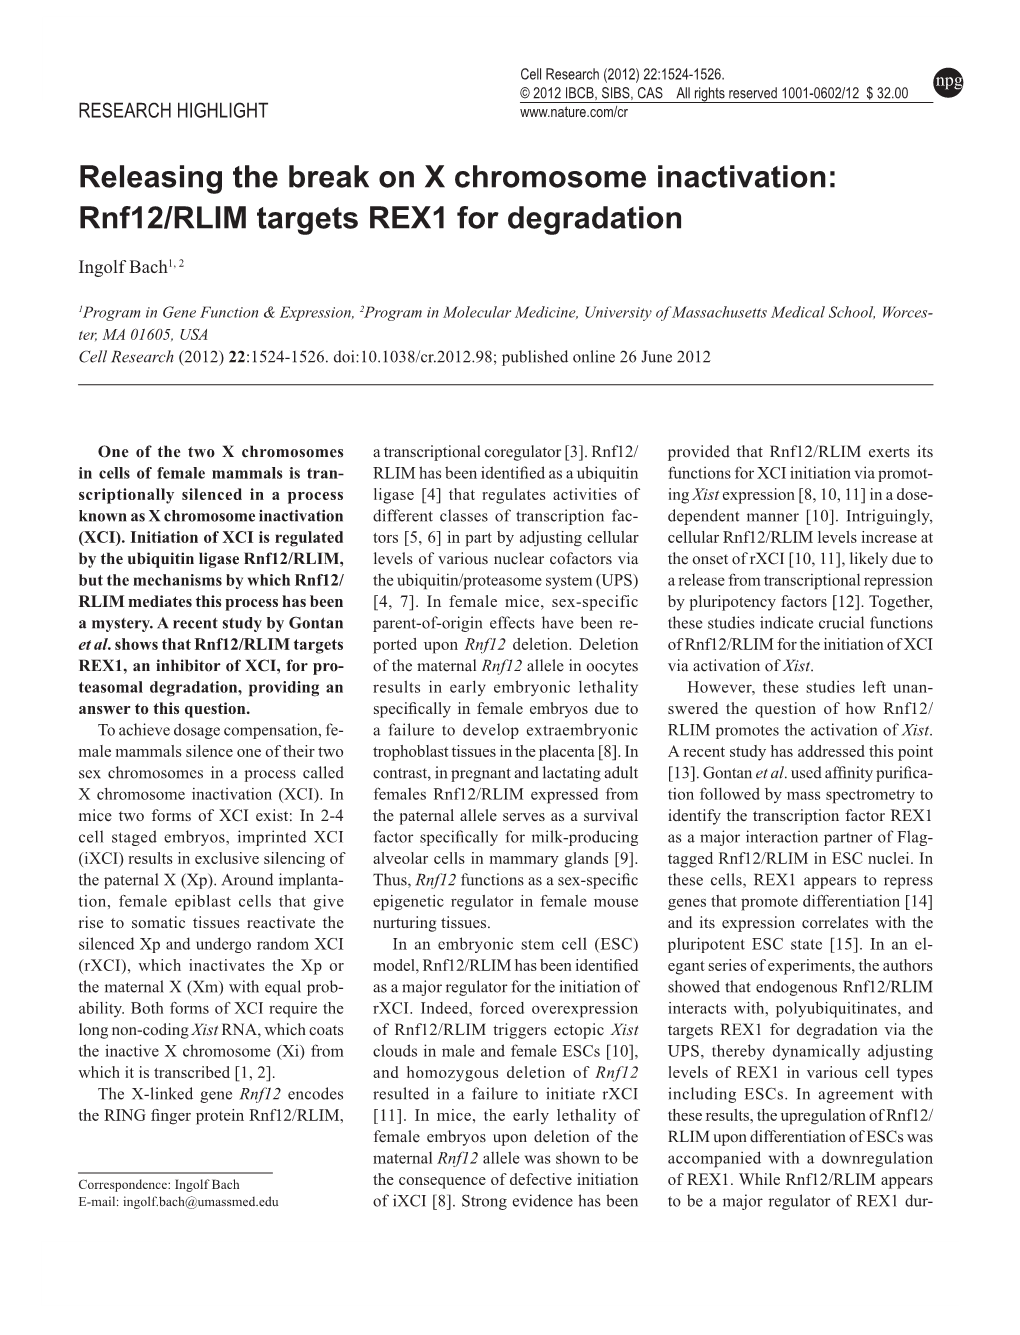 Releasing the Break on X Chromosome Inactivation: Rnf12/RLIM Targets REX1 for Degradation